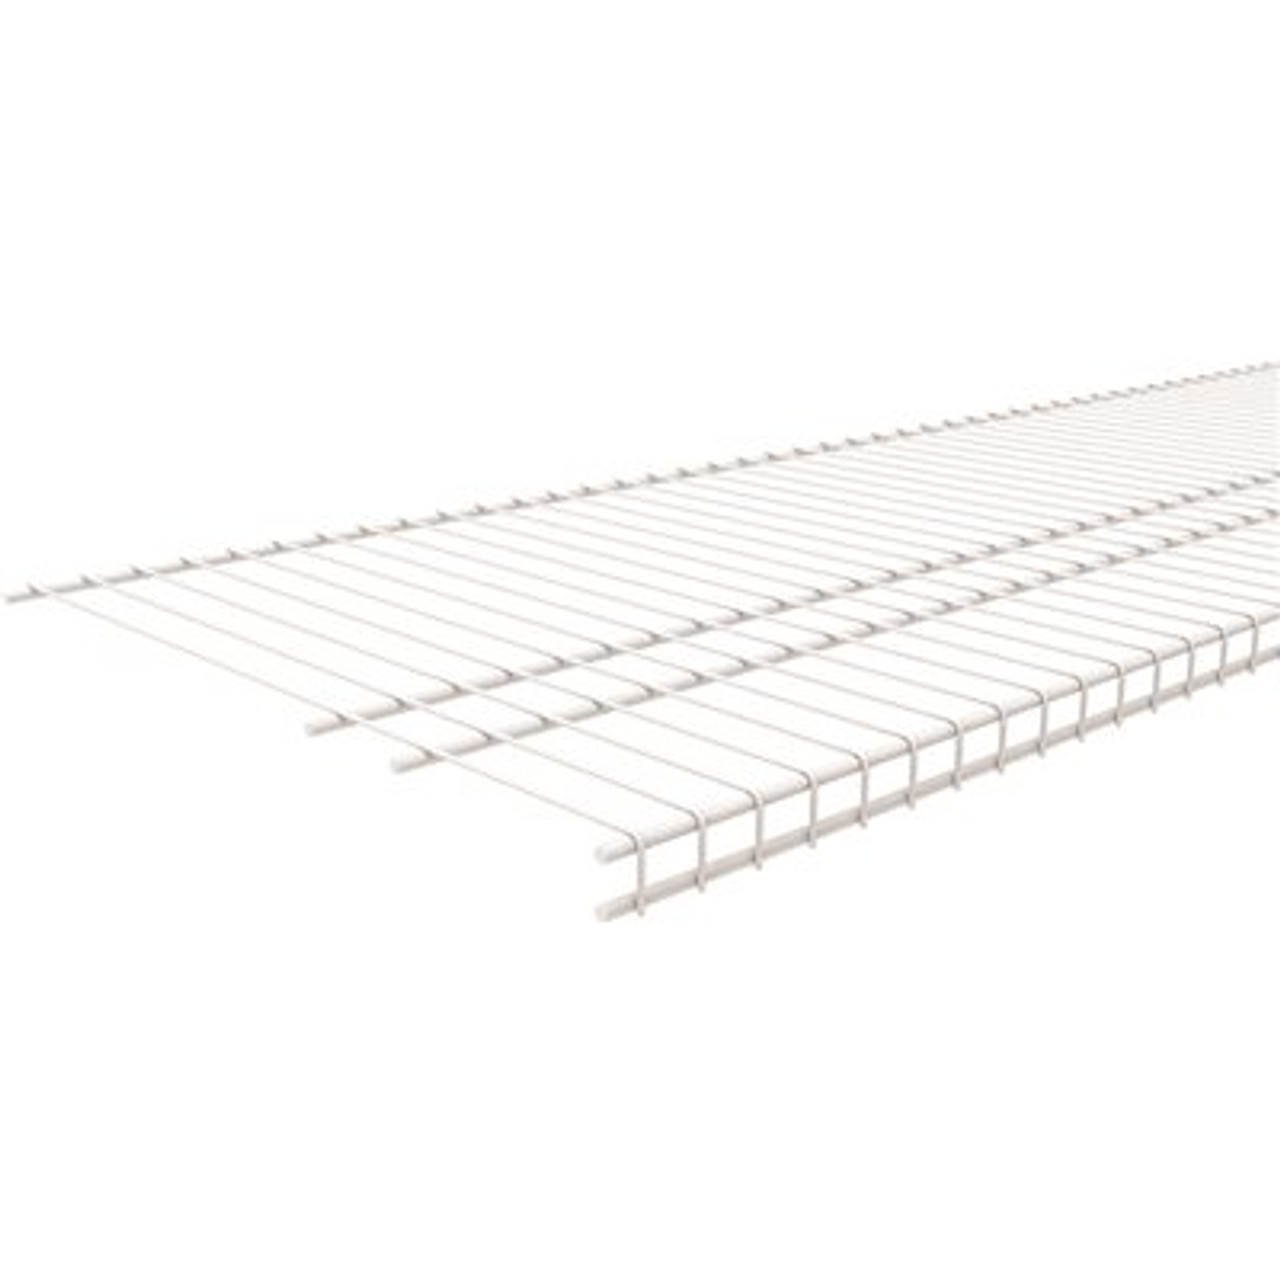 Closetmaid Superslide 144 In. W X 16 In. D X 1 In. H White Ventilated Wall Mounted Shelf